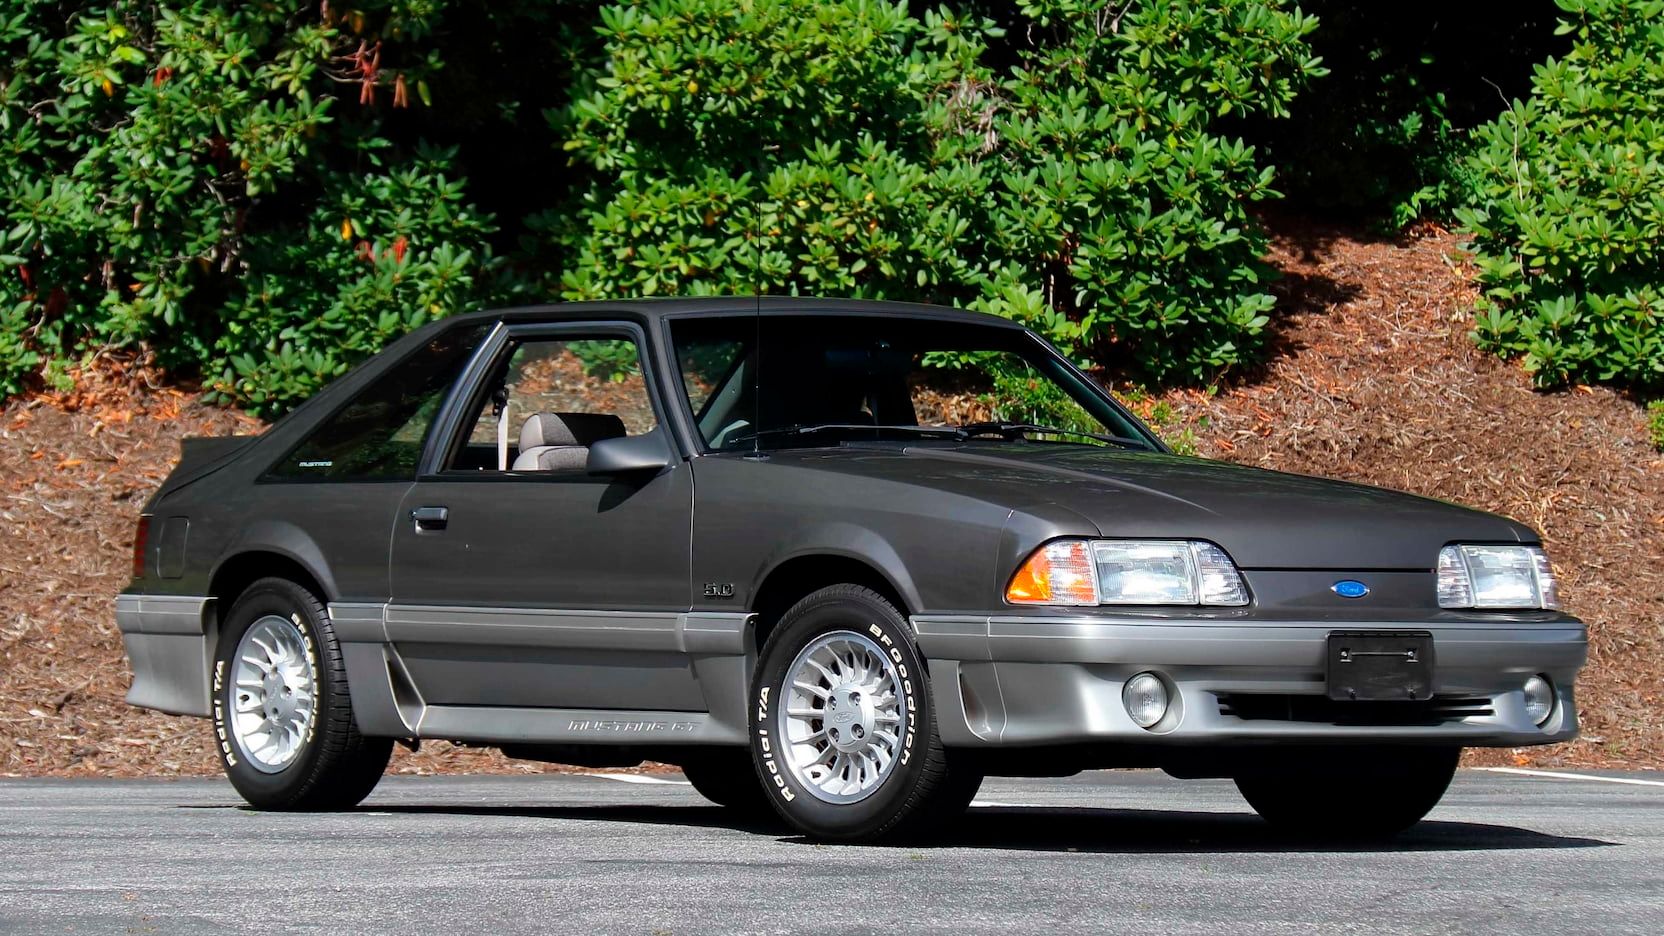 Gray 1990 Ford Mustang 5.0 GT on the road